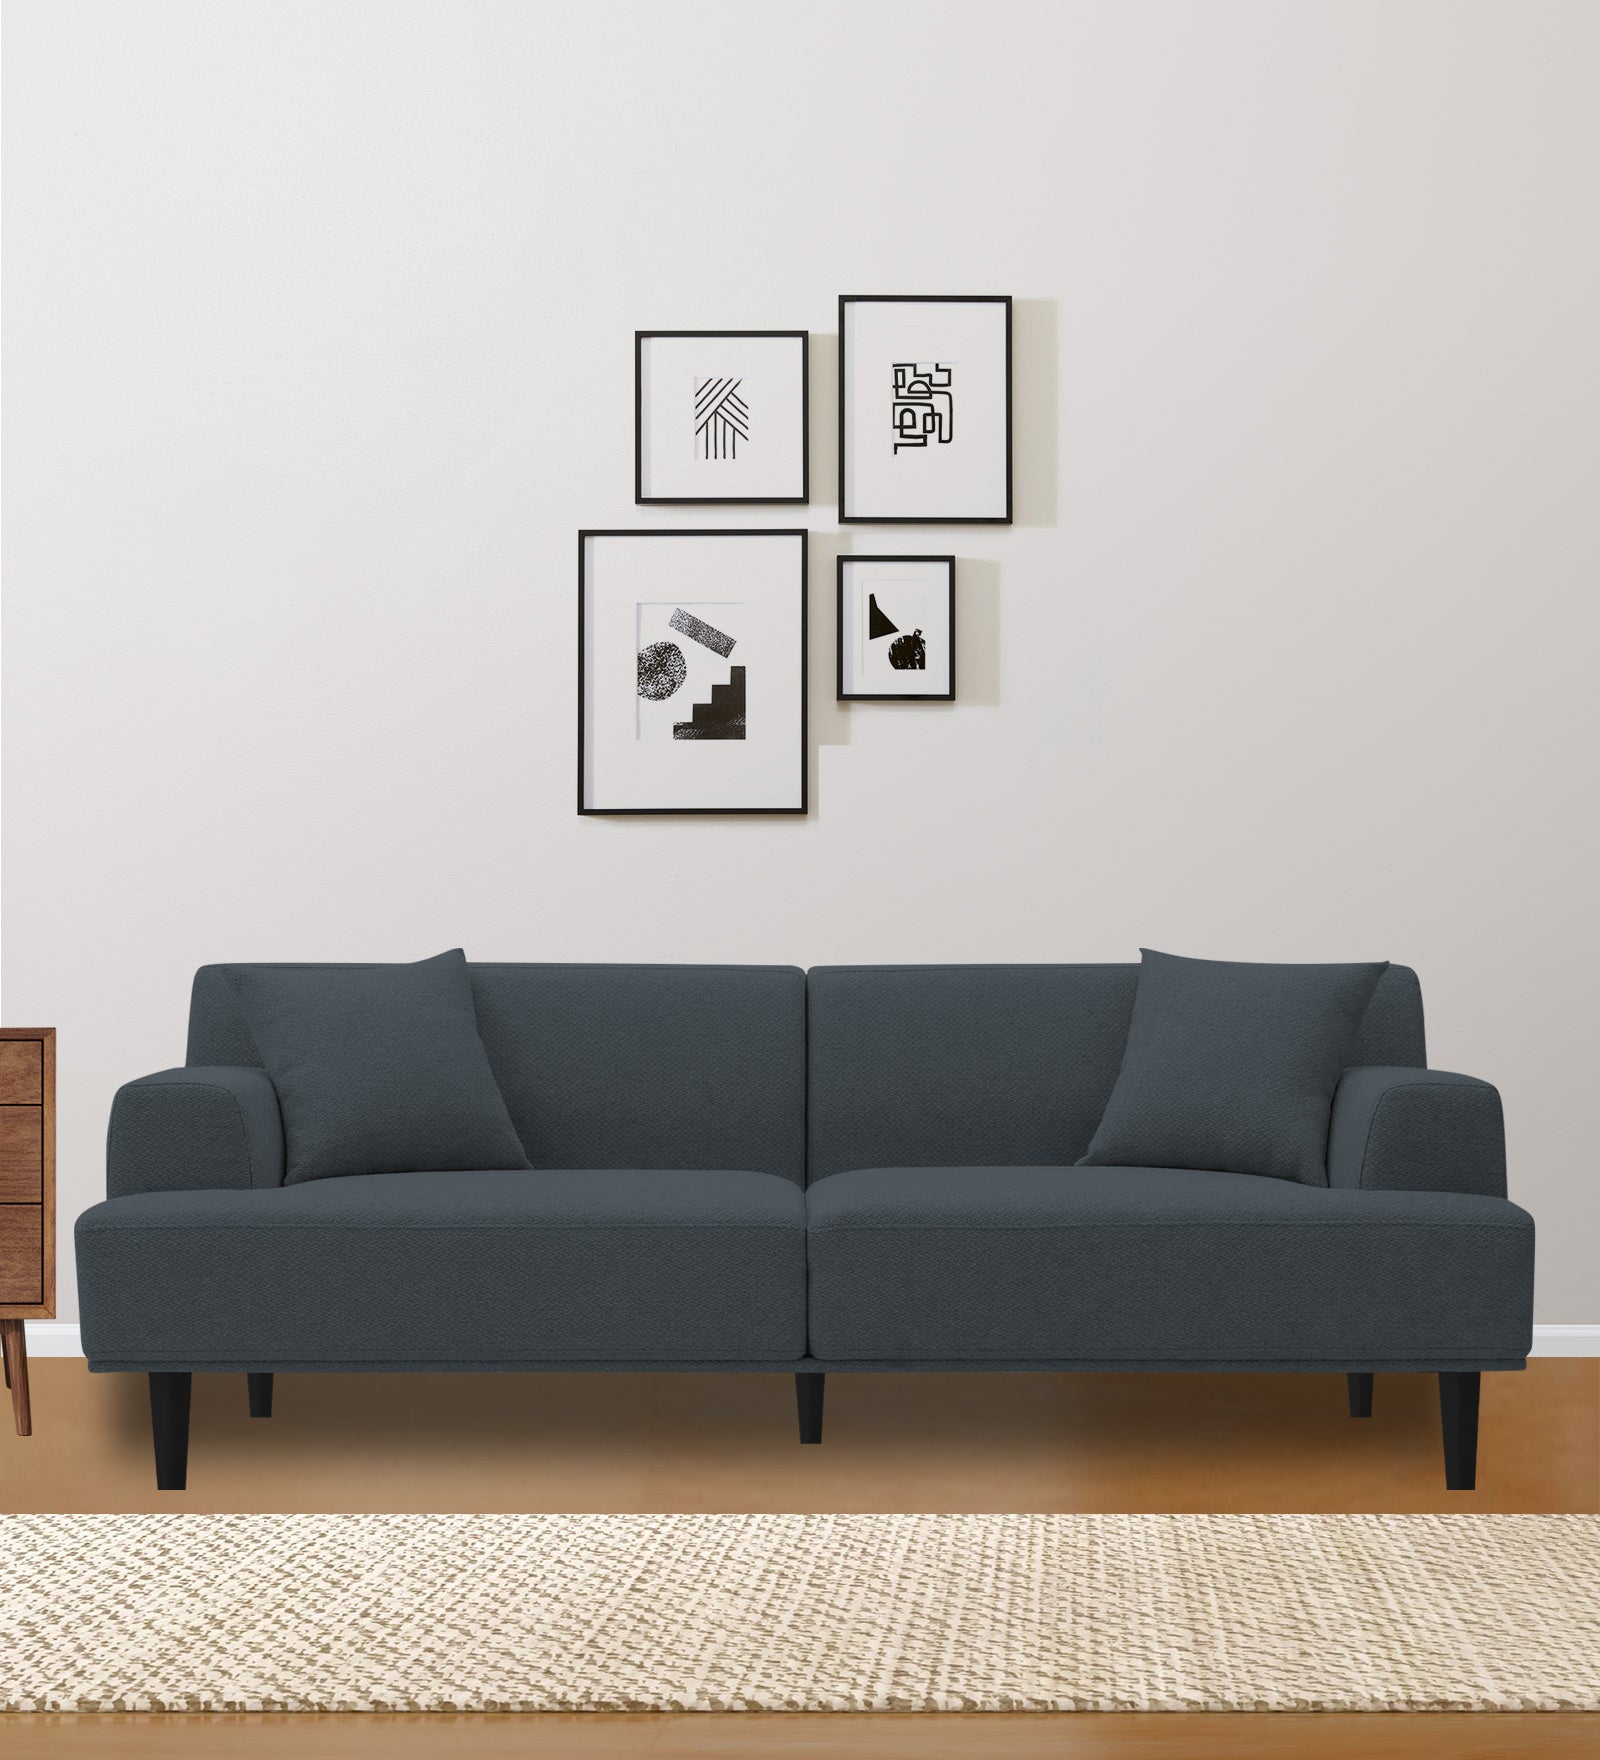 Cobby Fabric 3 Seater Sofa in Duby Grey Colour